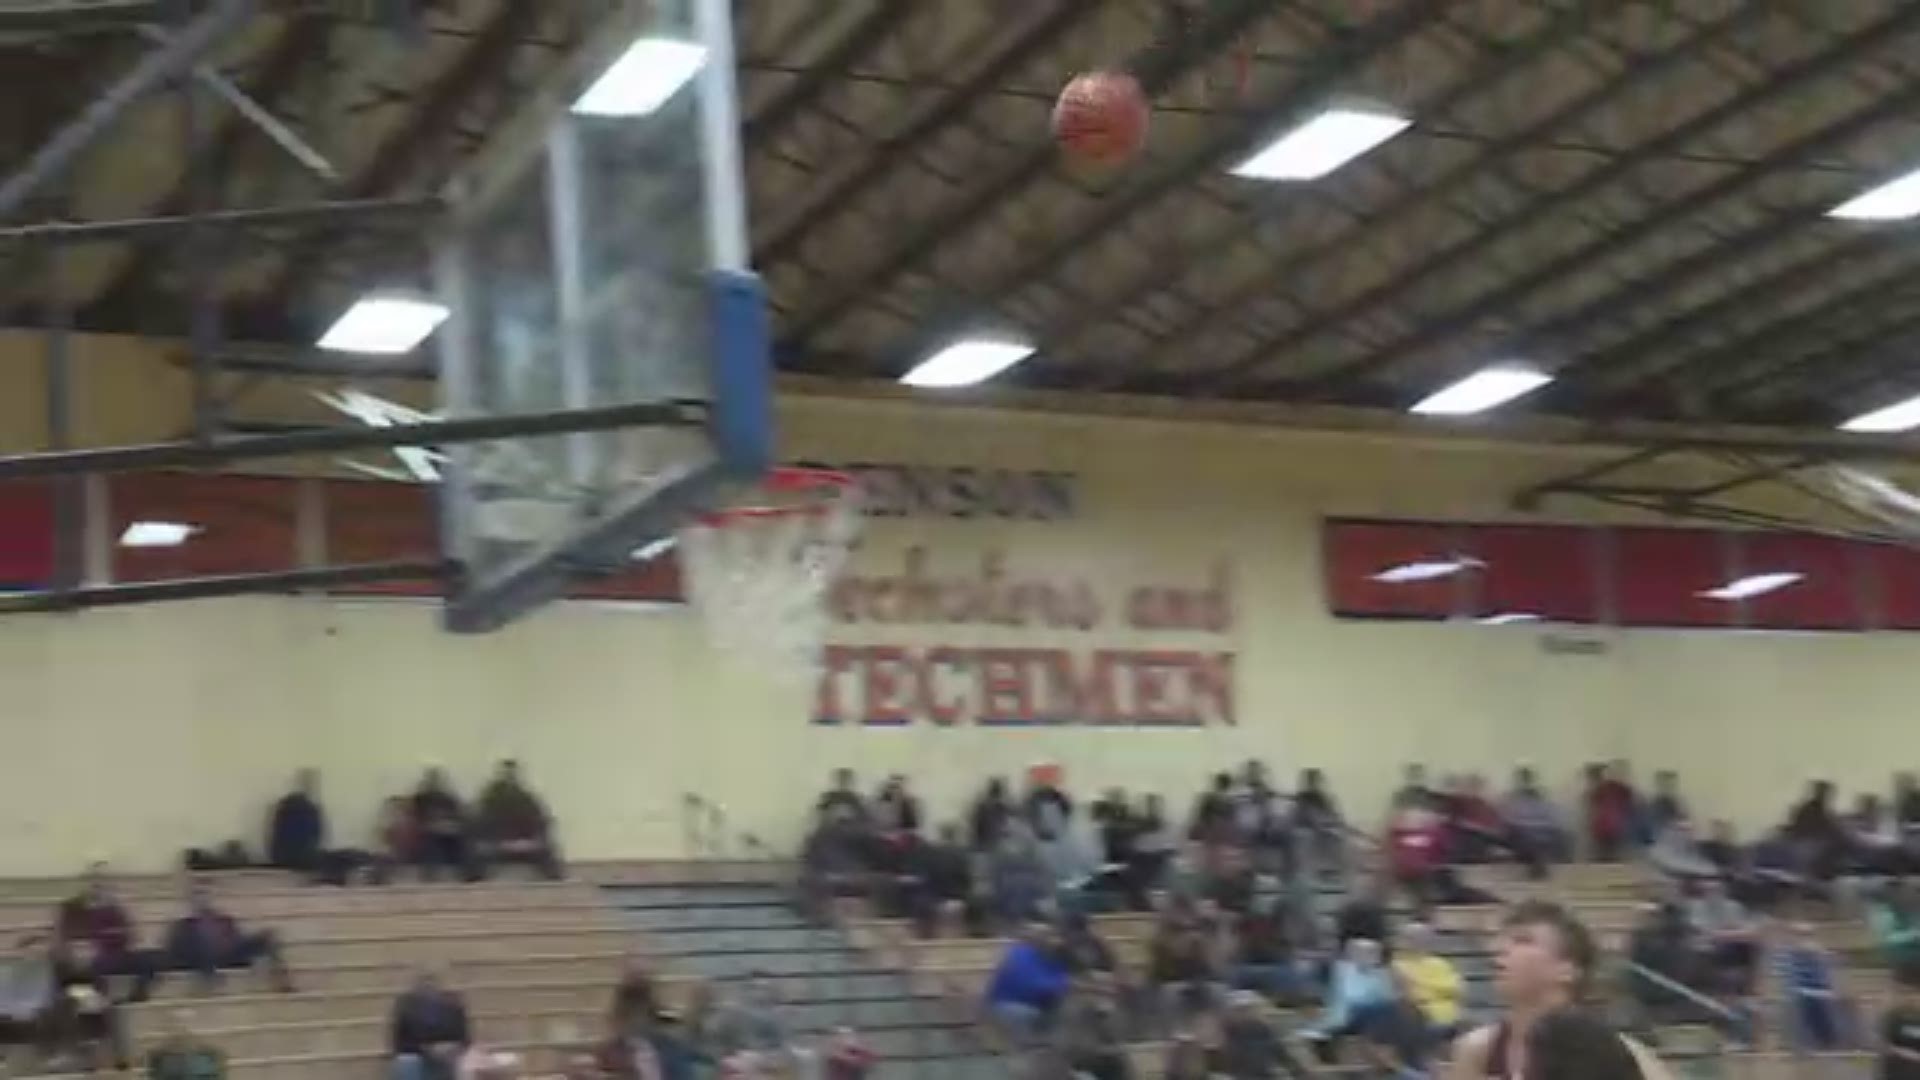 Highlights of the Benson Techsters 2019 boys basketball team. Highlights were part of KGW’s Friday Night Hoops coverage. #KGWPreps